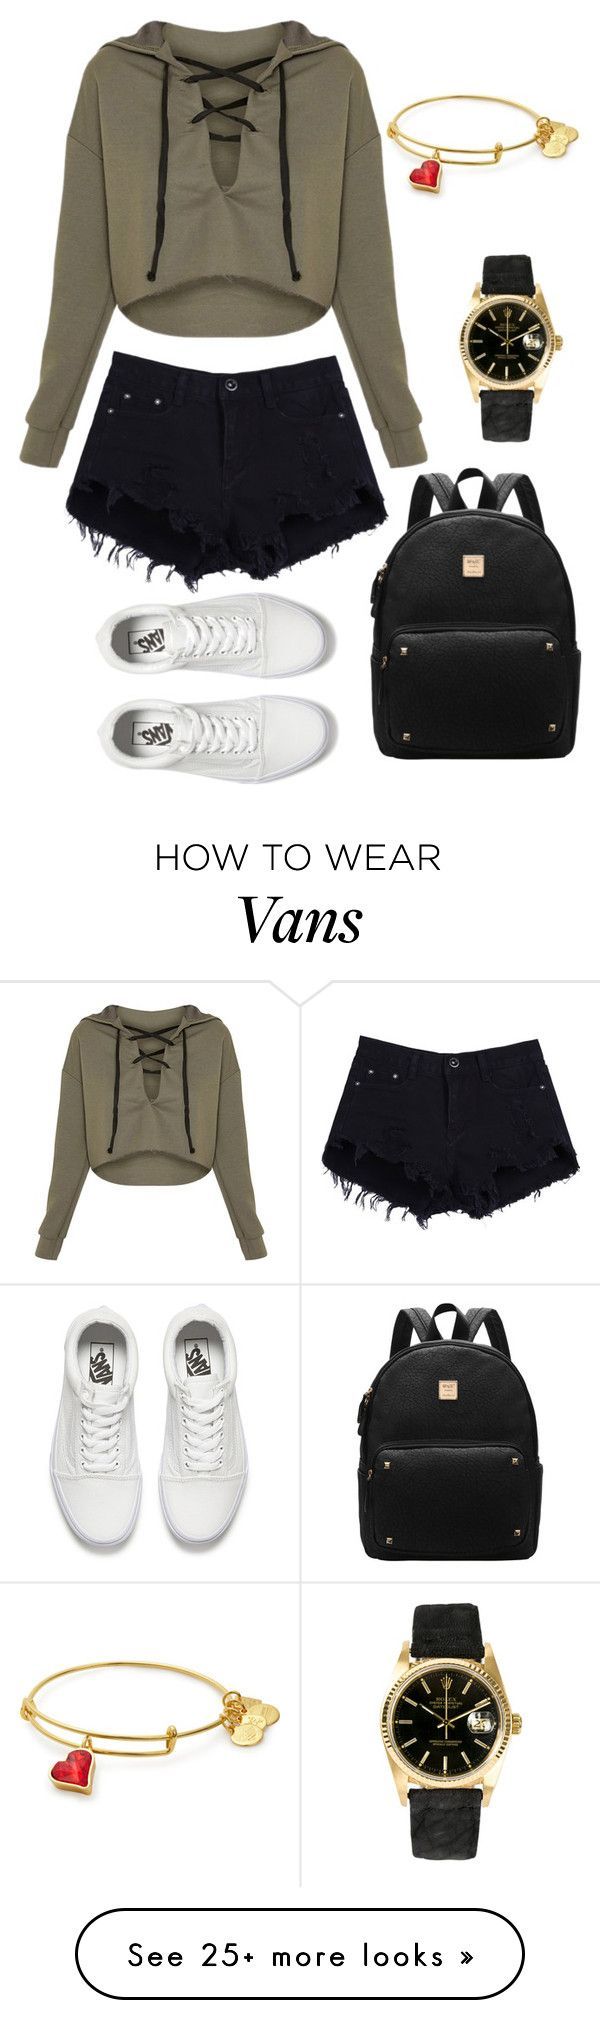 “Freshman year” by wanderlustpan on Polyvore featuring Vans and Rolex